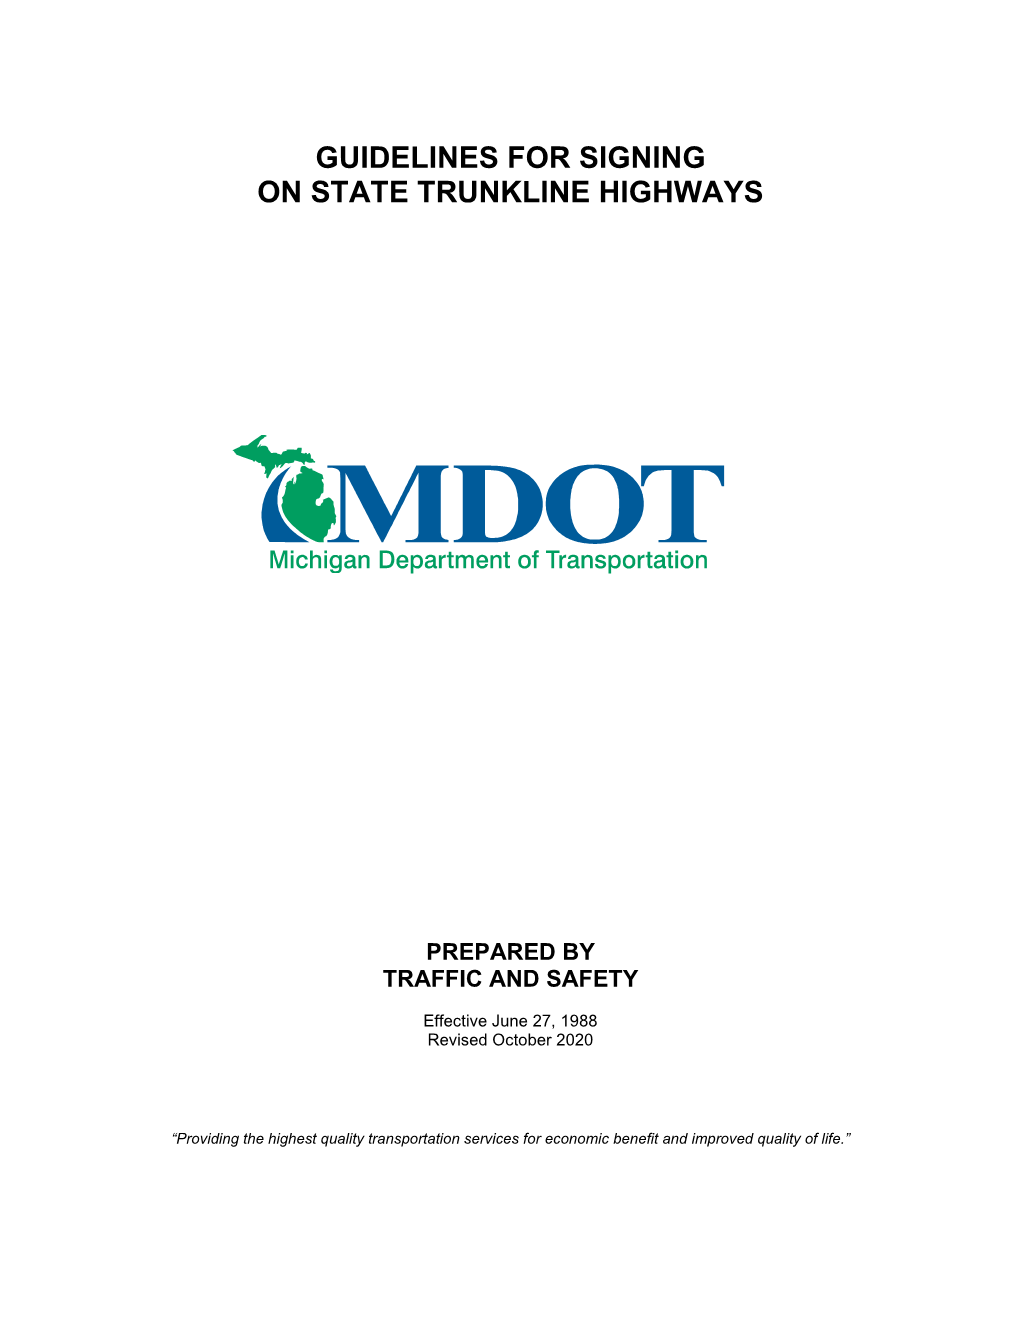 Guidelines for Signing on State Trunkline Highways